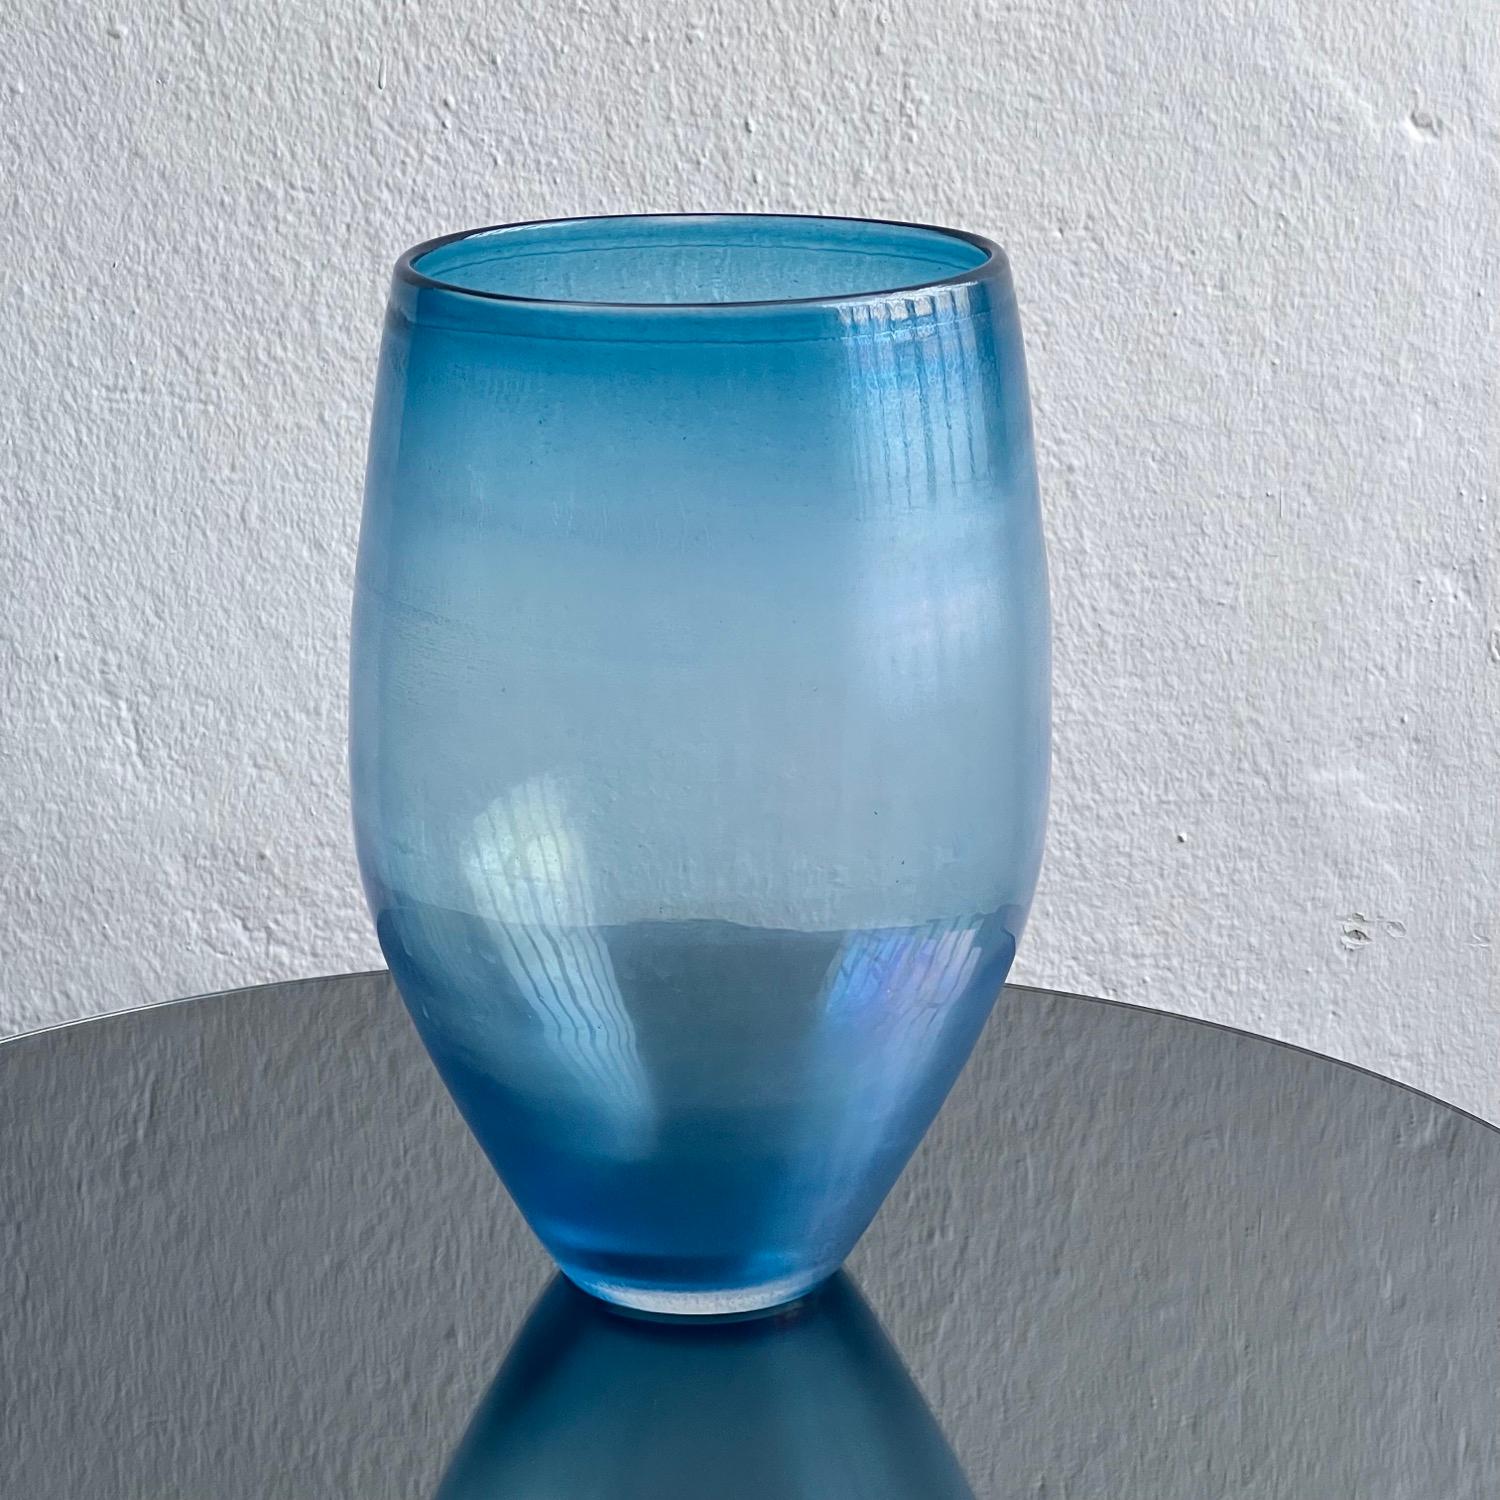 This (very) big Murano vase is a sight to behold. With its unusual shape and matte surface finish, it's already quite not common; but what makes it truly stand out is the color - even though it looks just blue at first, it actually has a mesmerizing